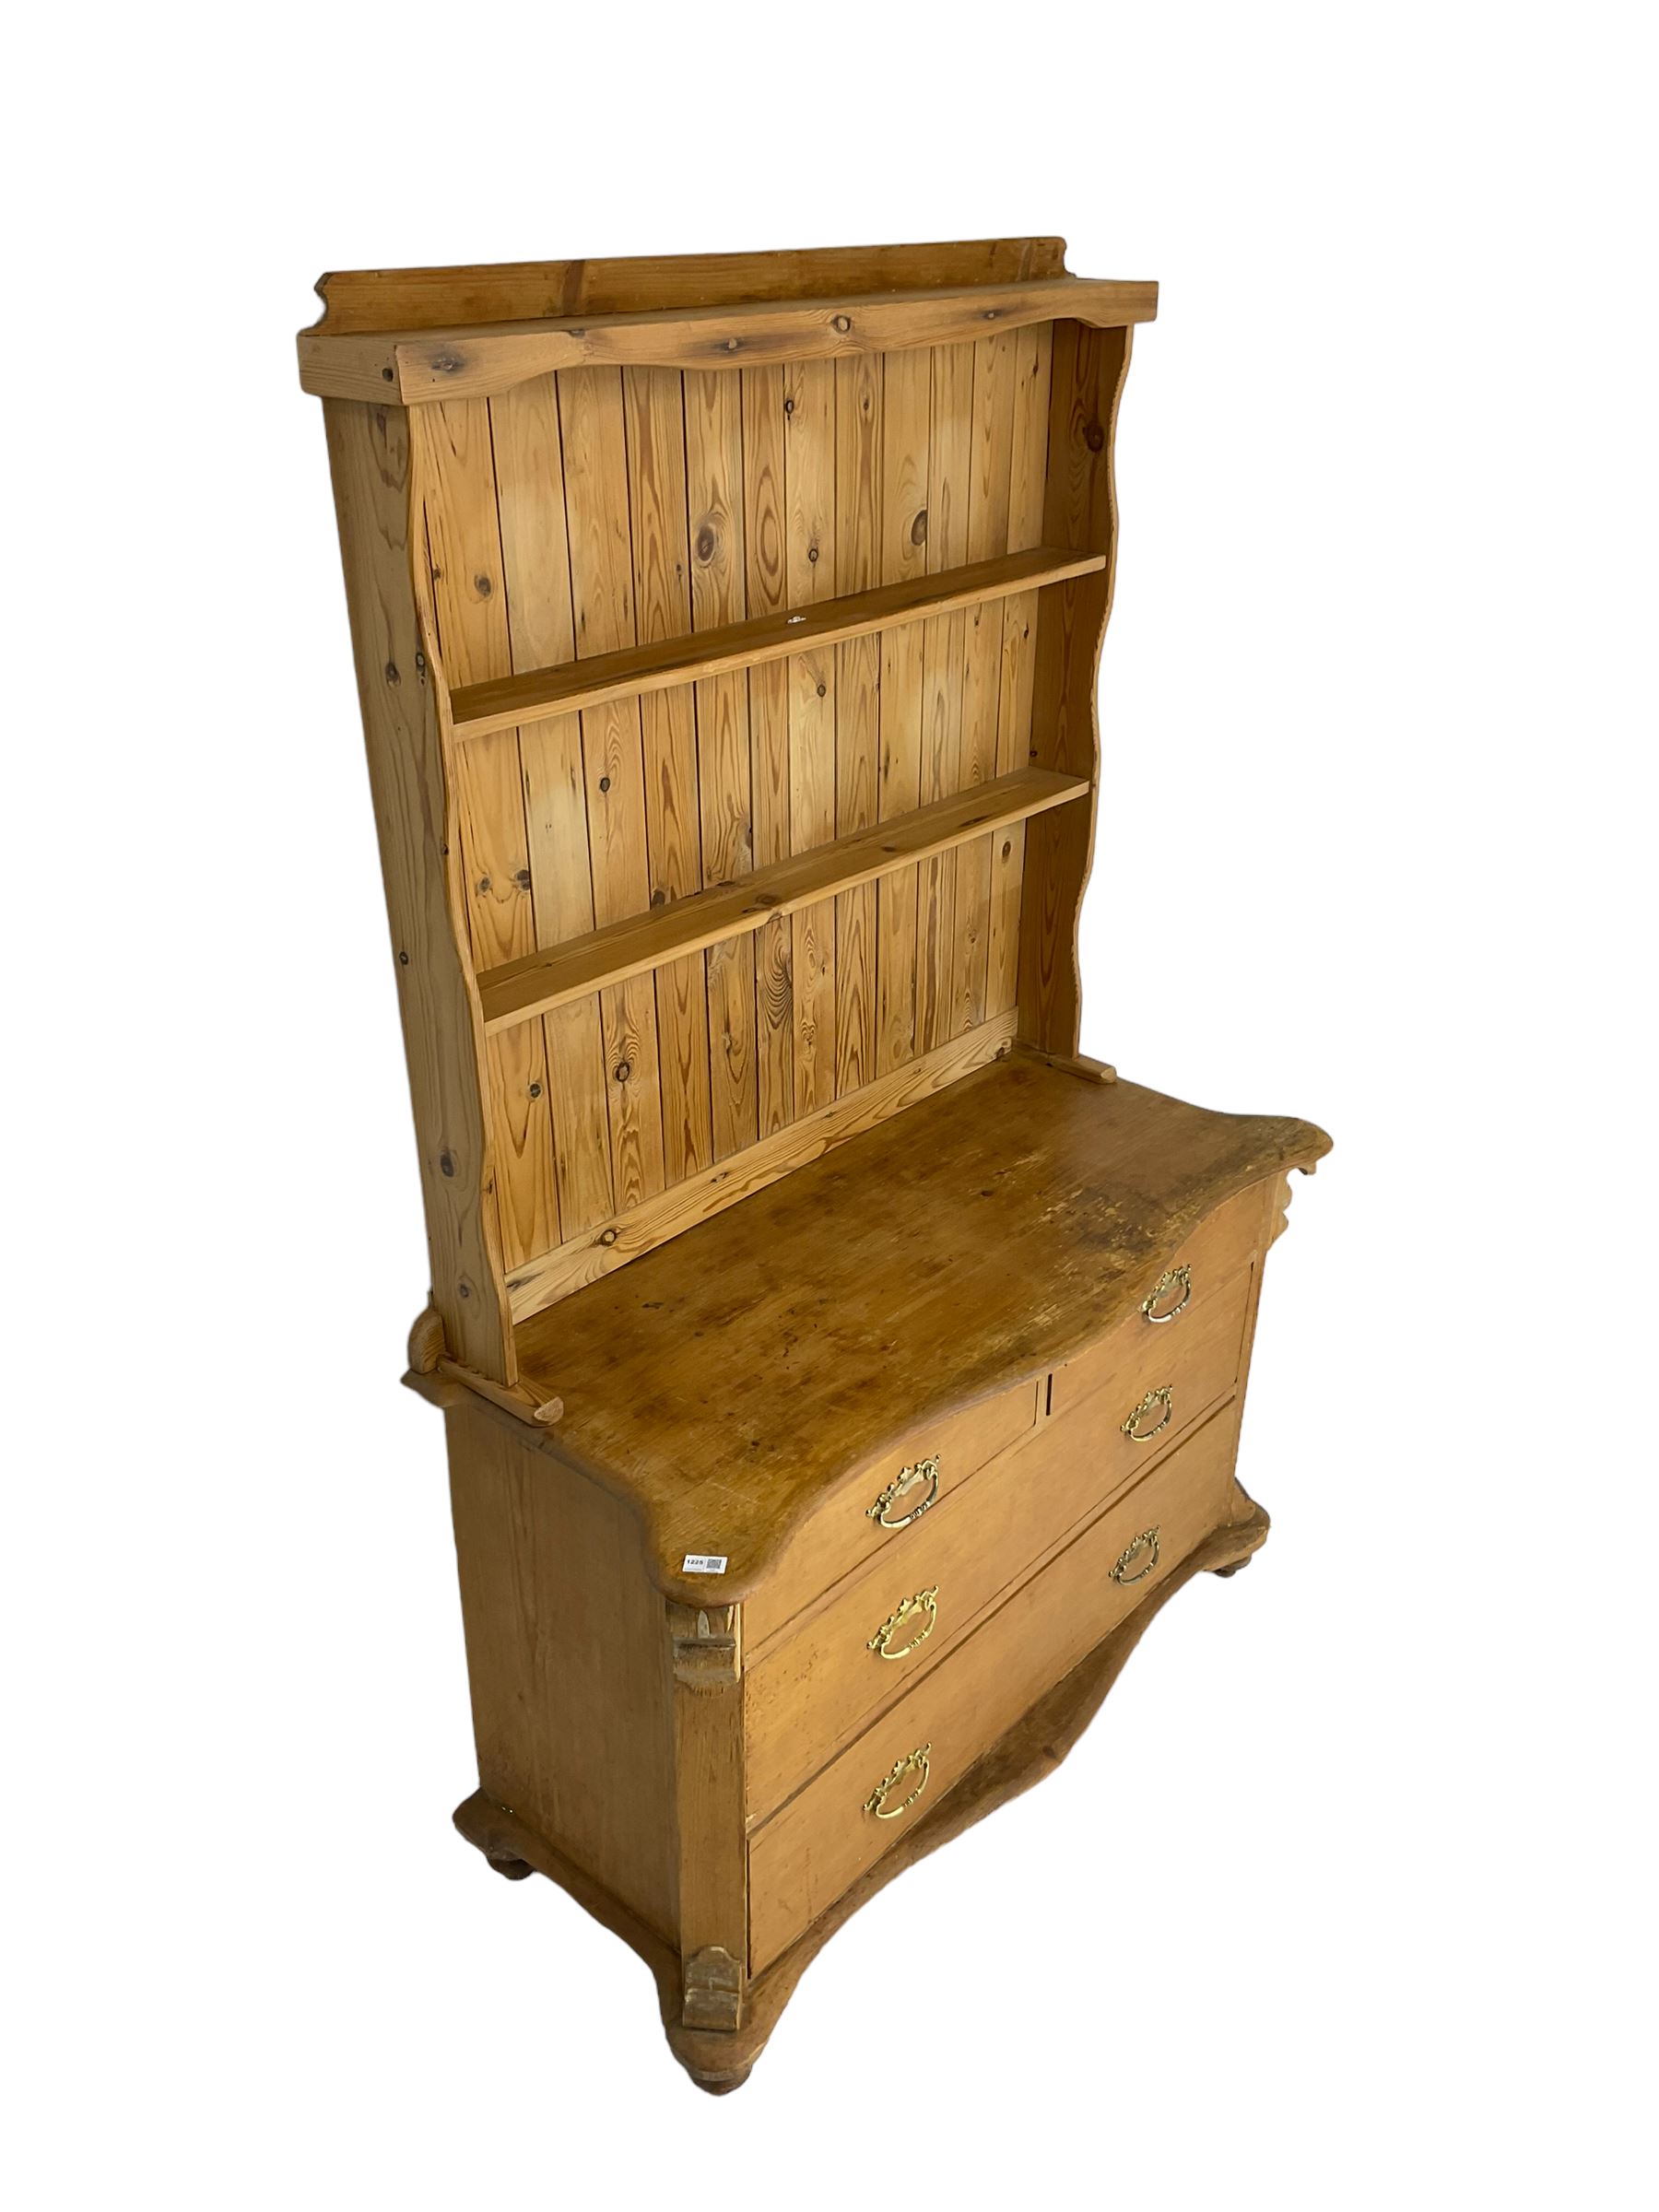 19th century and later pine farmhouse dresser - Image 5 of 8